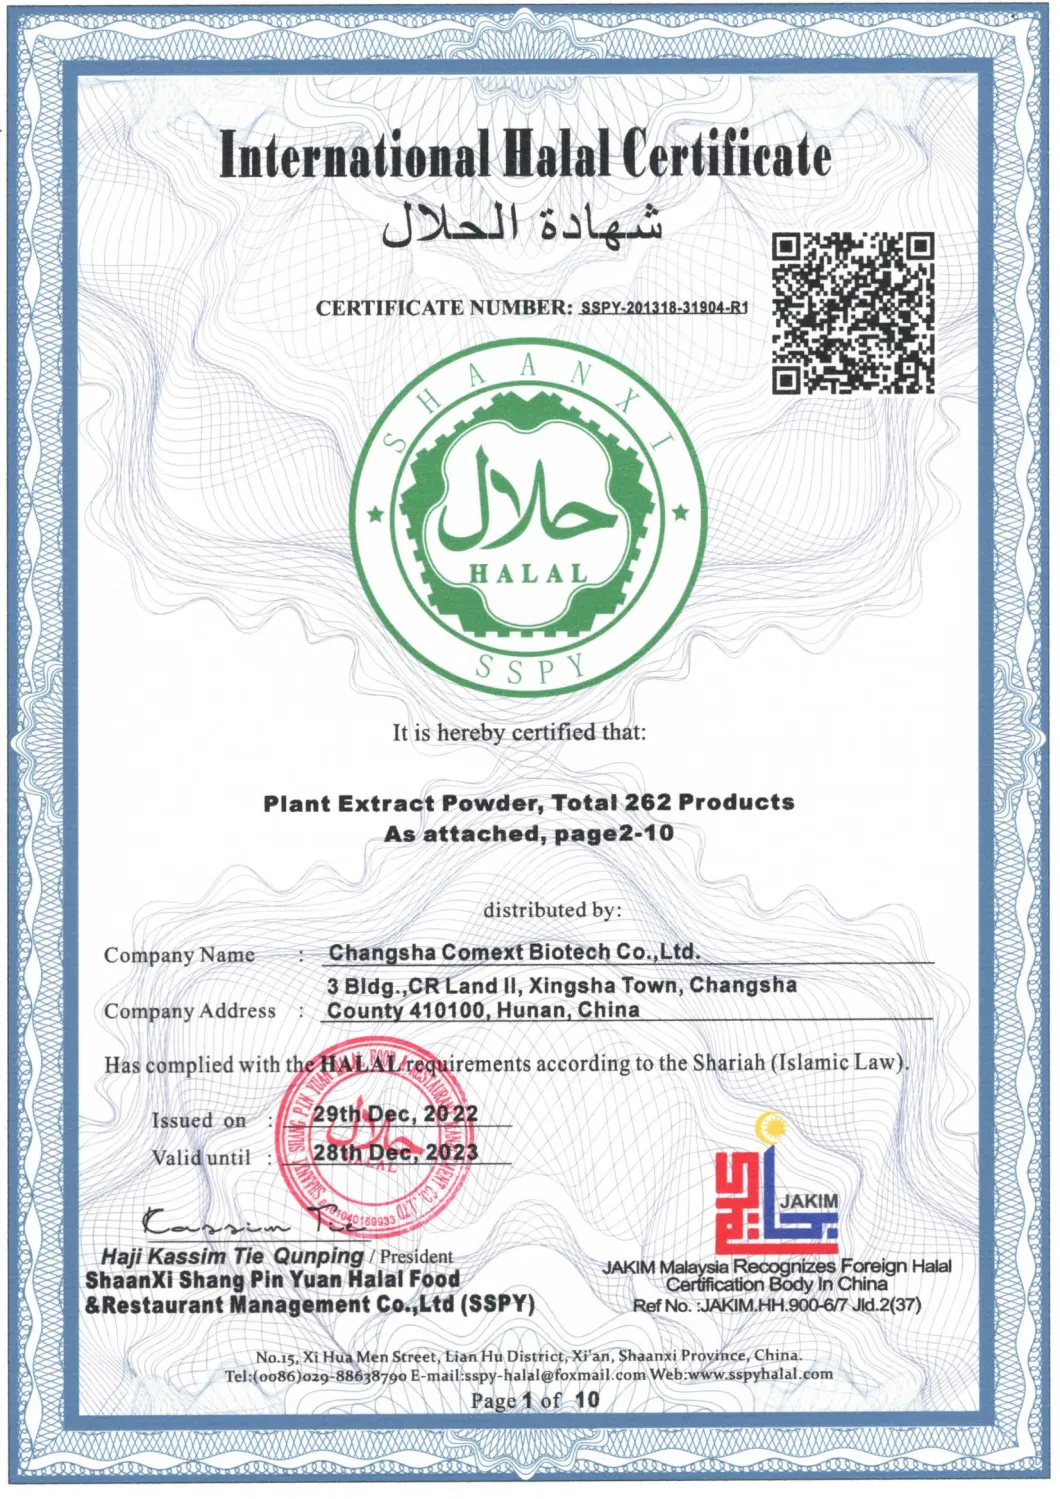 Comext ISO Halal Kosher Certificated Wholesale Price 24% Total Flavones Powder Ginkgo Biloba Extract Lower Blood Pressure